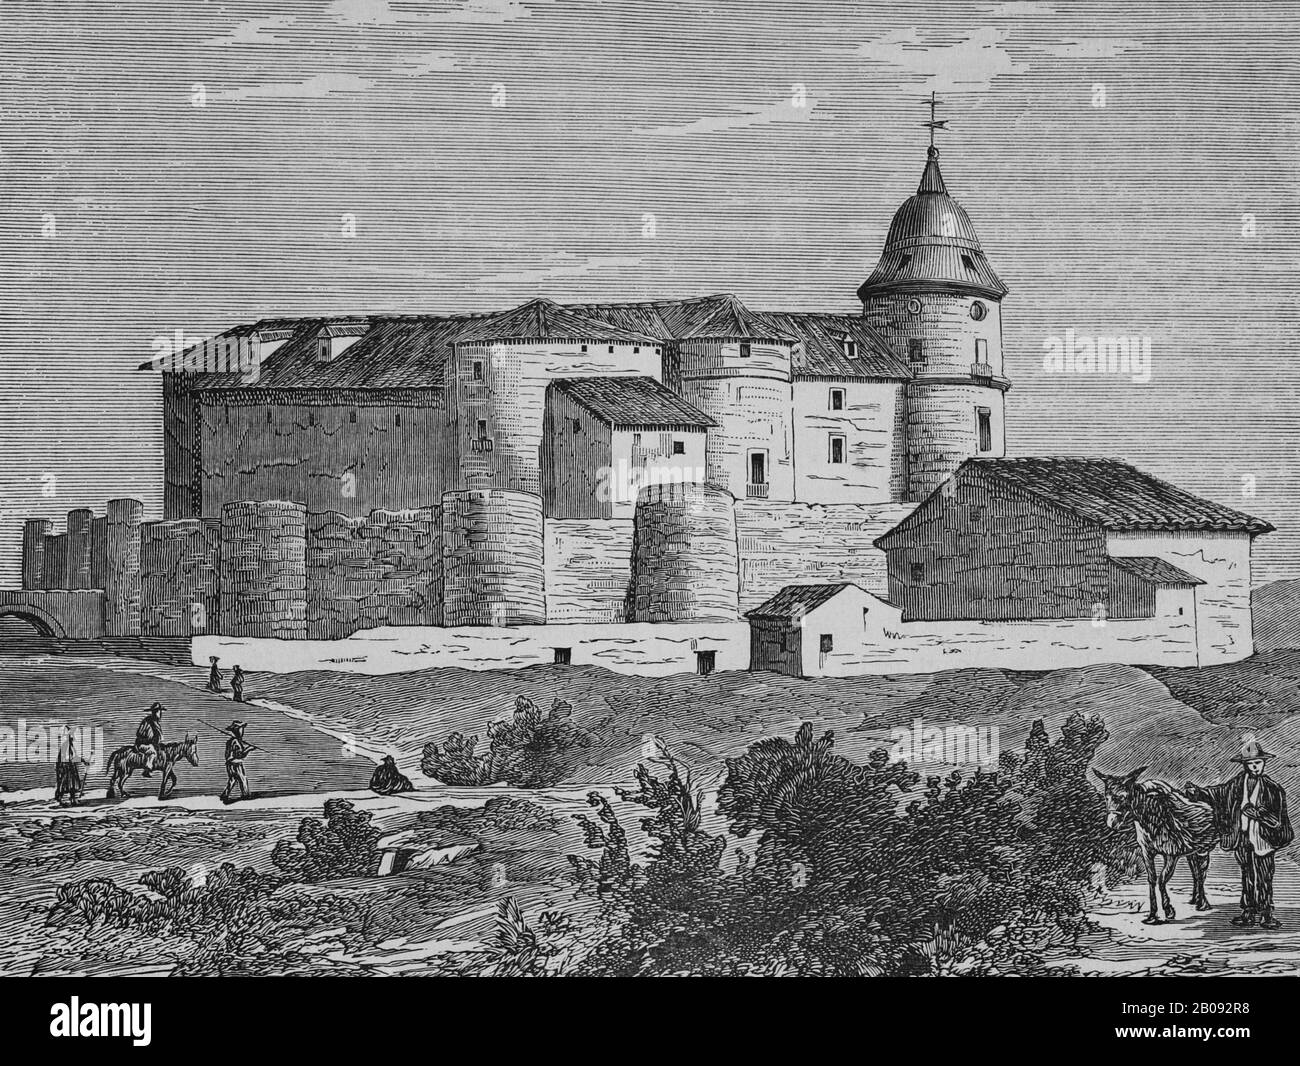 Spain, Valladolid province. Castle of the Archive of Simancas. It was built in the 15th, 16th and 17 th centuries by the Admirals of Castile, the Enriquez family. Engraving by Sierra, 19th century. Cronica General de España, Historia Ilustrada y Descriptiva de sus Provincias. Asturias and Leon. Stock Photo